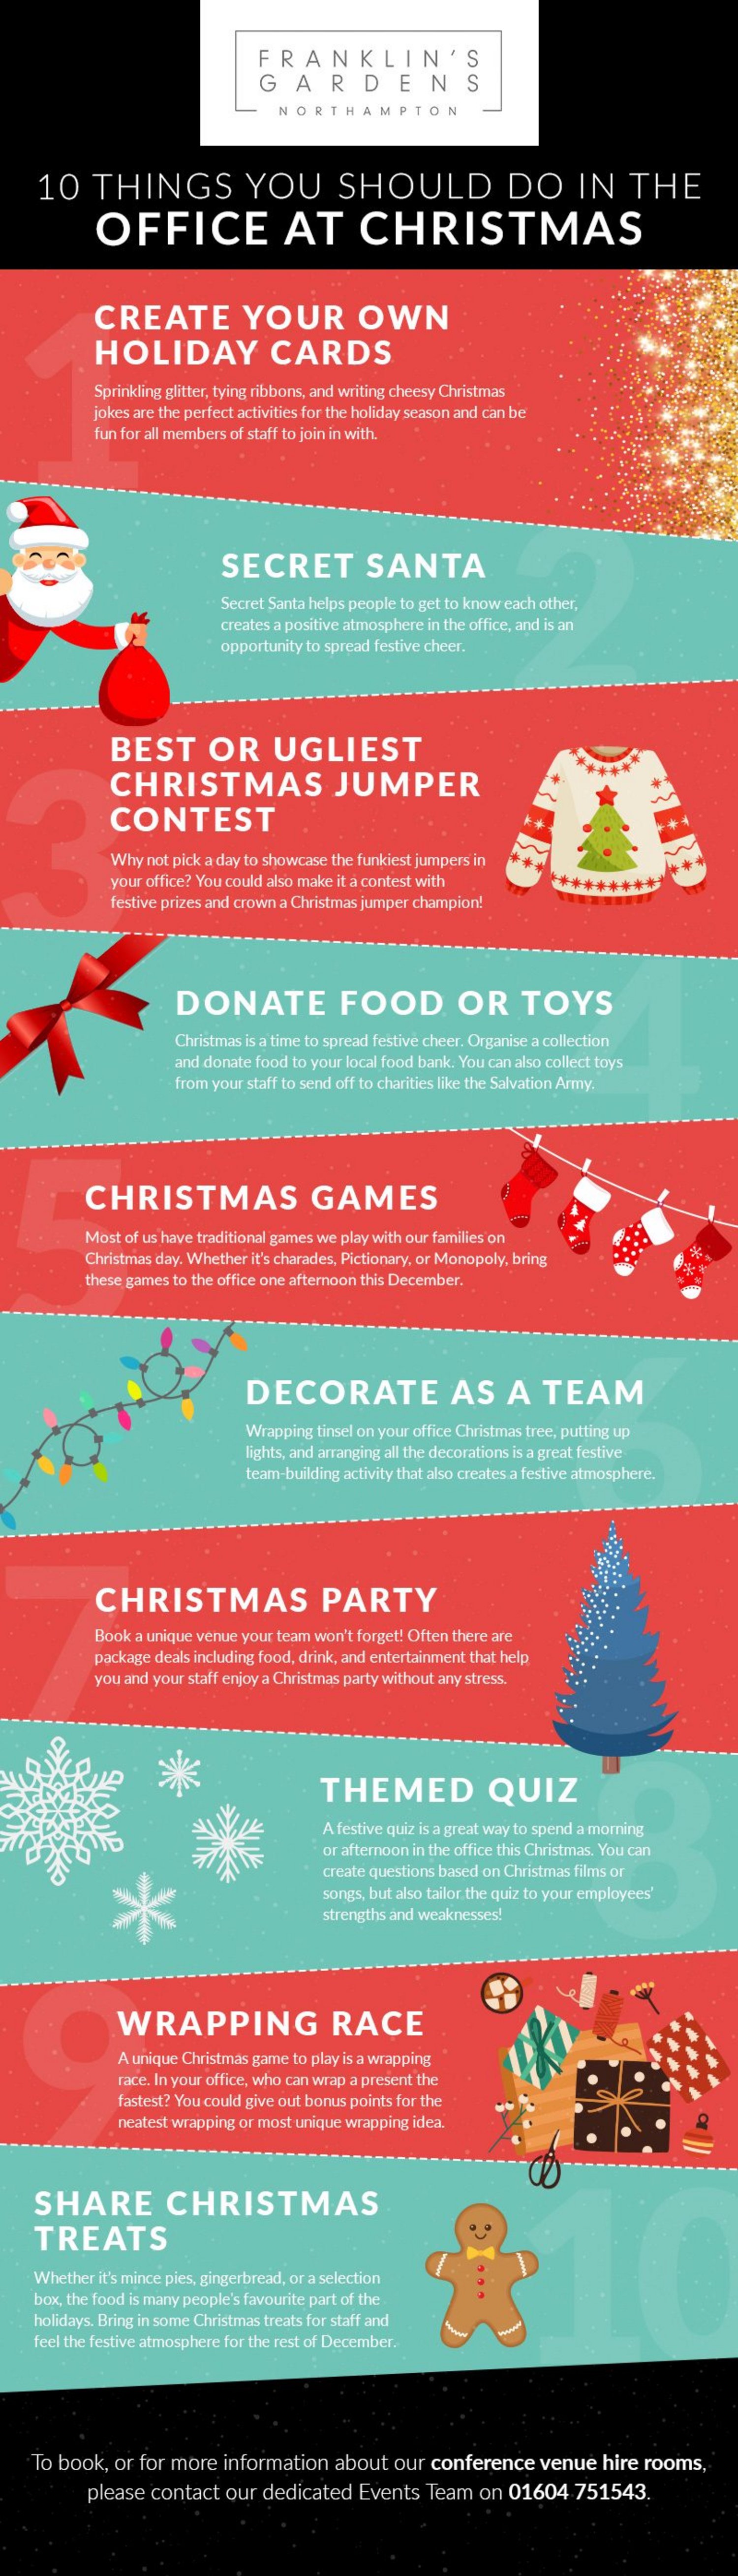 Top 10 Things To Do In The Office At Christmas